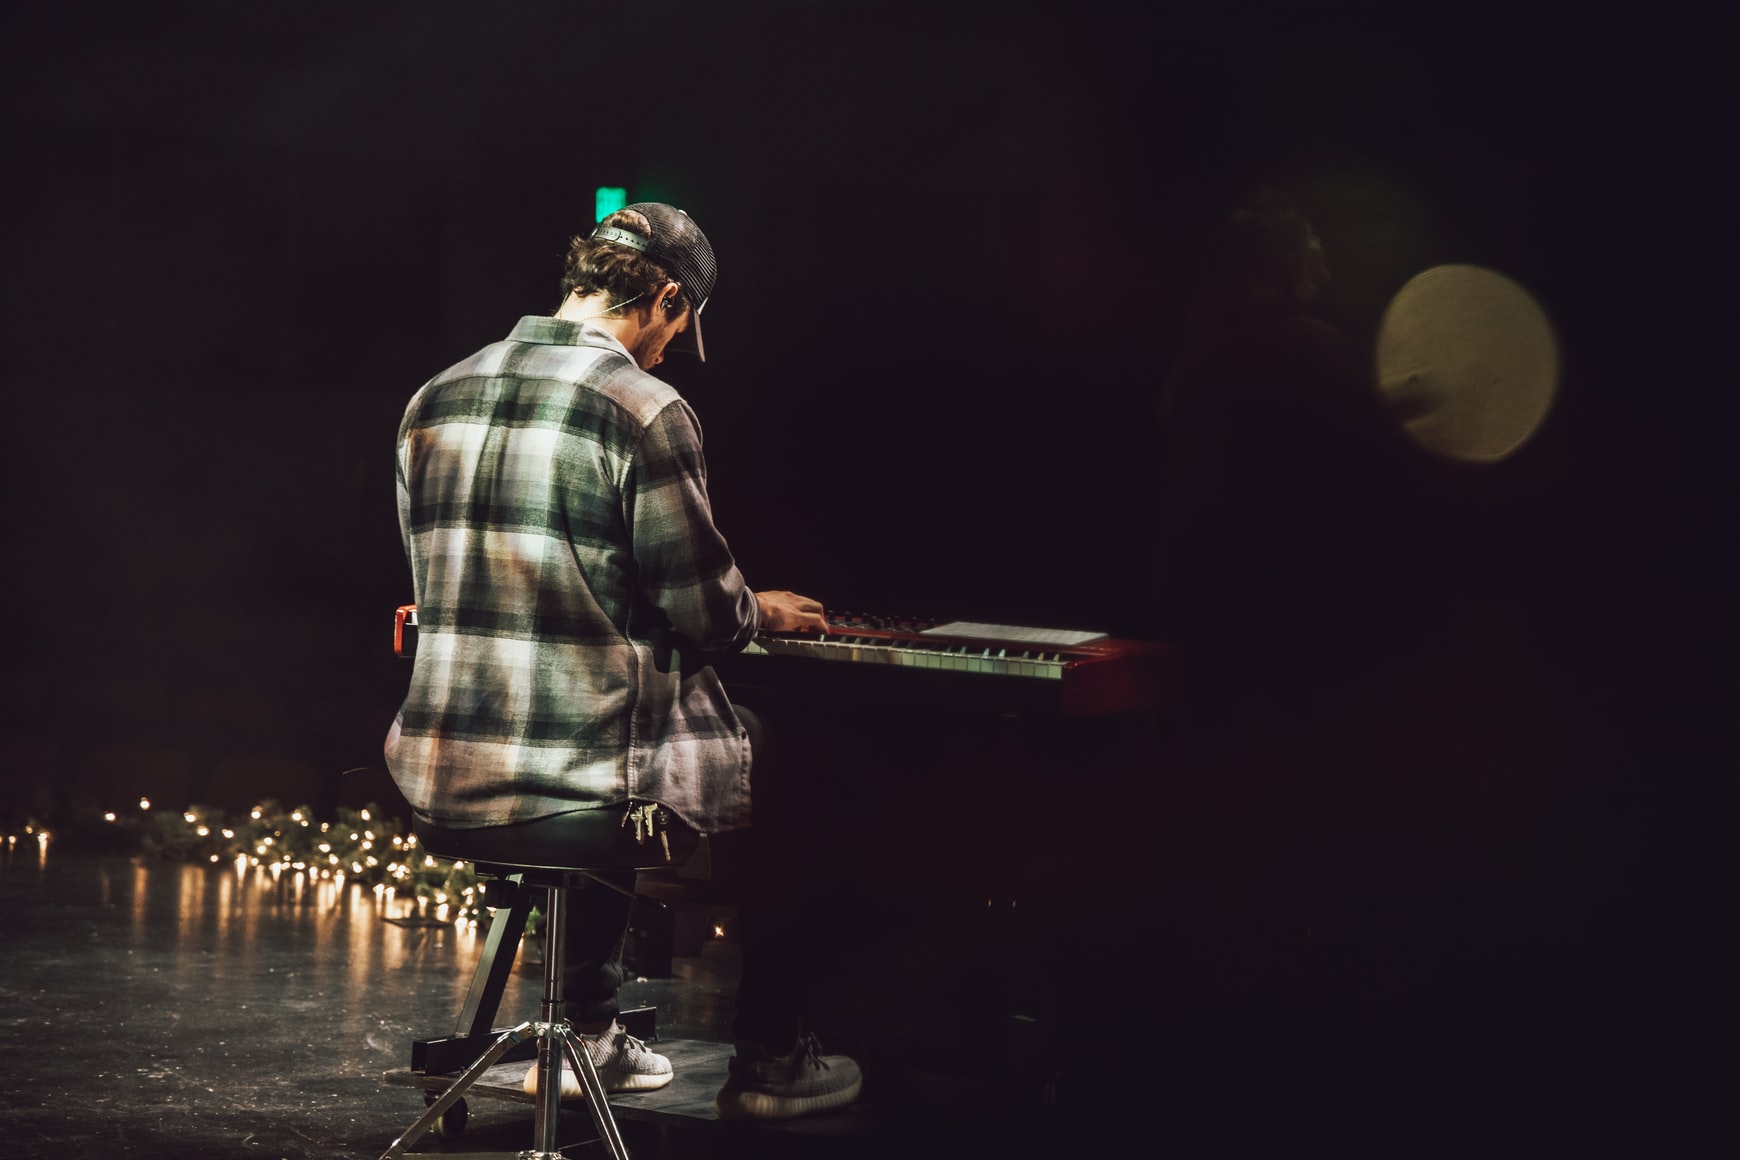 Man playing piano on stage